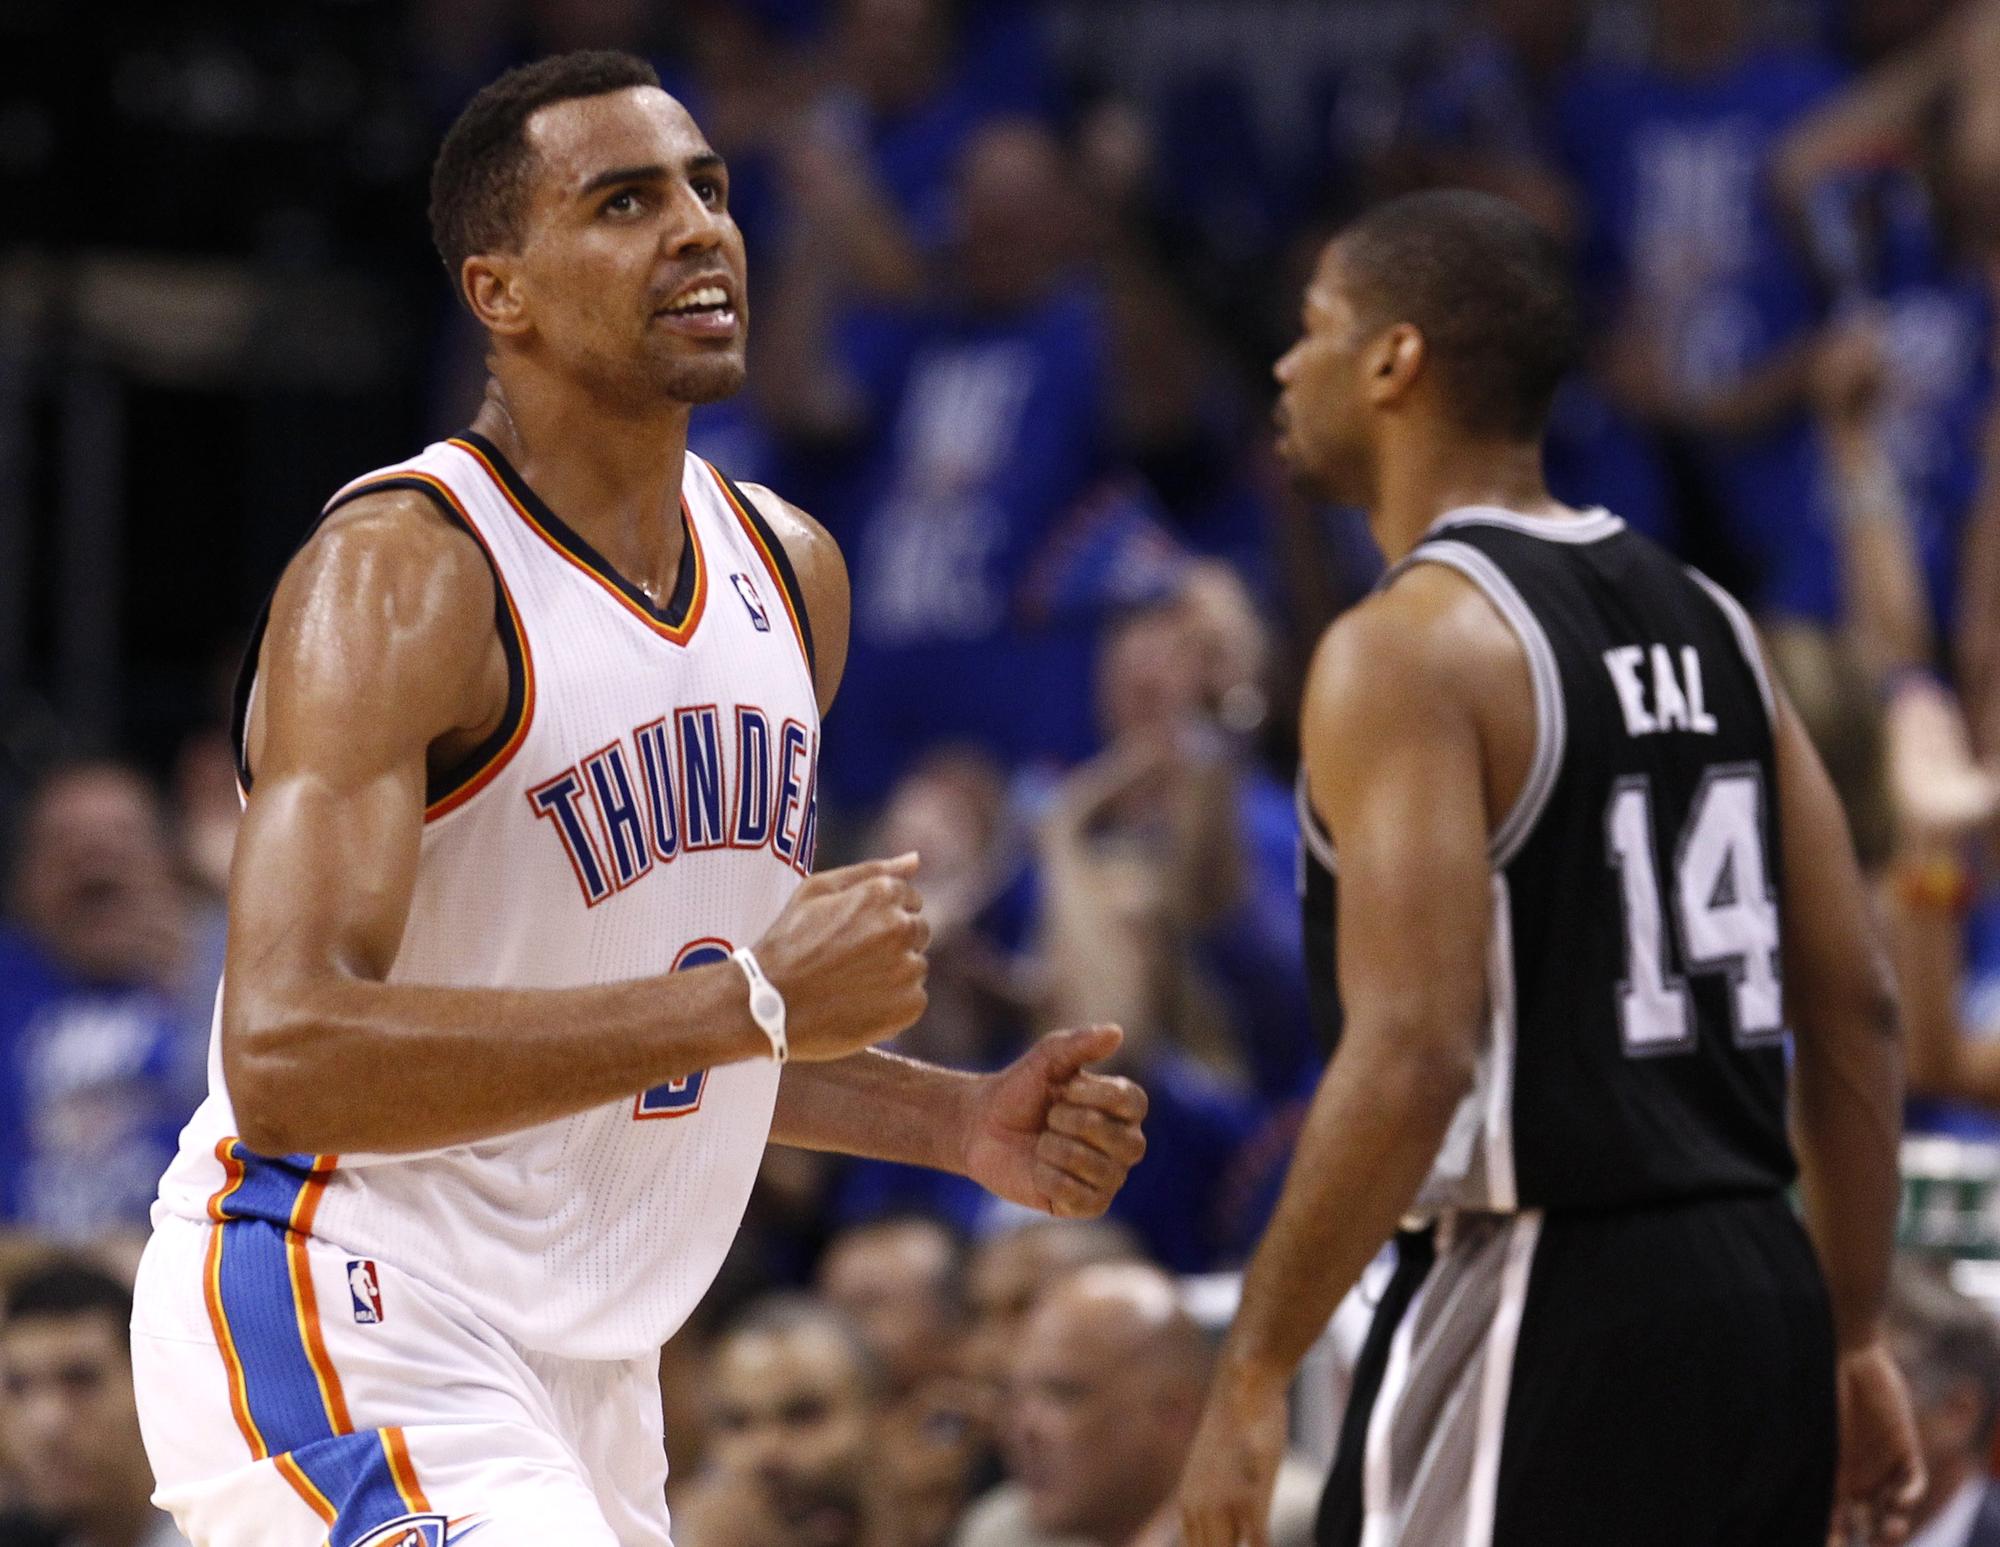 Oklahoma City Thunder shooting guard Thabo Sefolosha (L) celebrates next to San Antonio Spurs point guard Gary Neal (14) in the second half during Game 3 of the NBA Western Conference basketball finals in Oklahoma City, Oklahoma, May 31, 2012 REUTERS/Jim Young (UNITED STATES - Tags: SPORT BASKETBALL) [REUTERS - Jim Young]